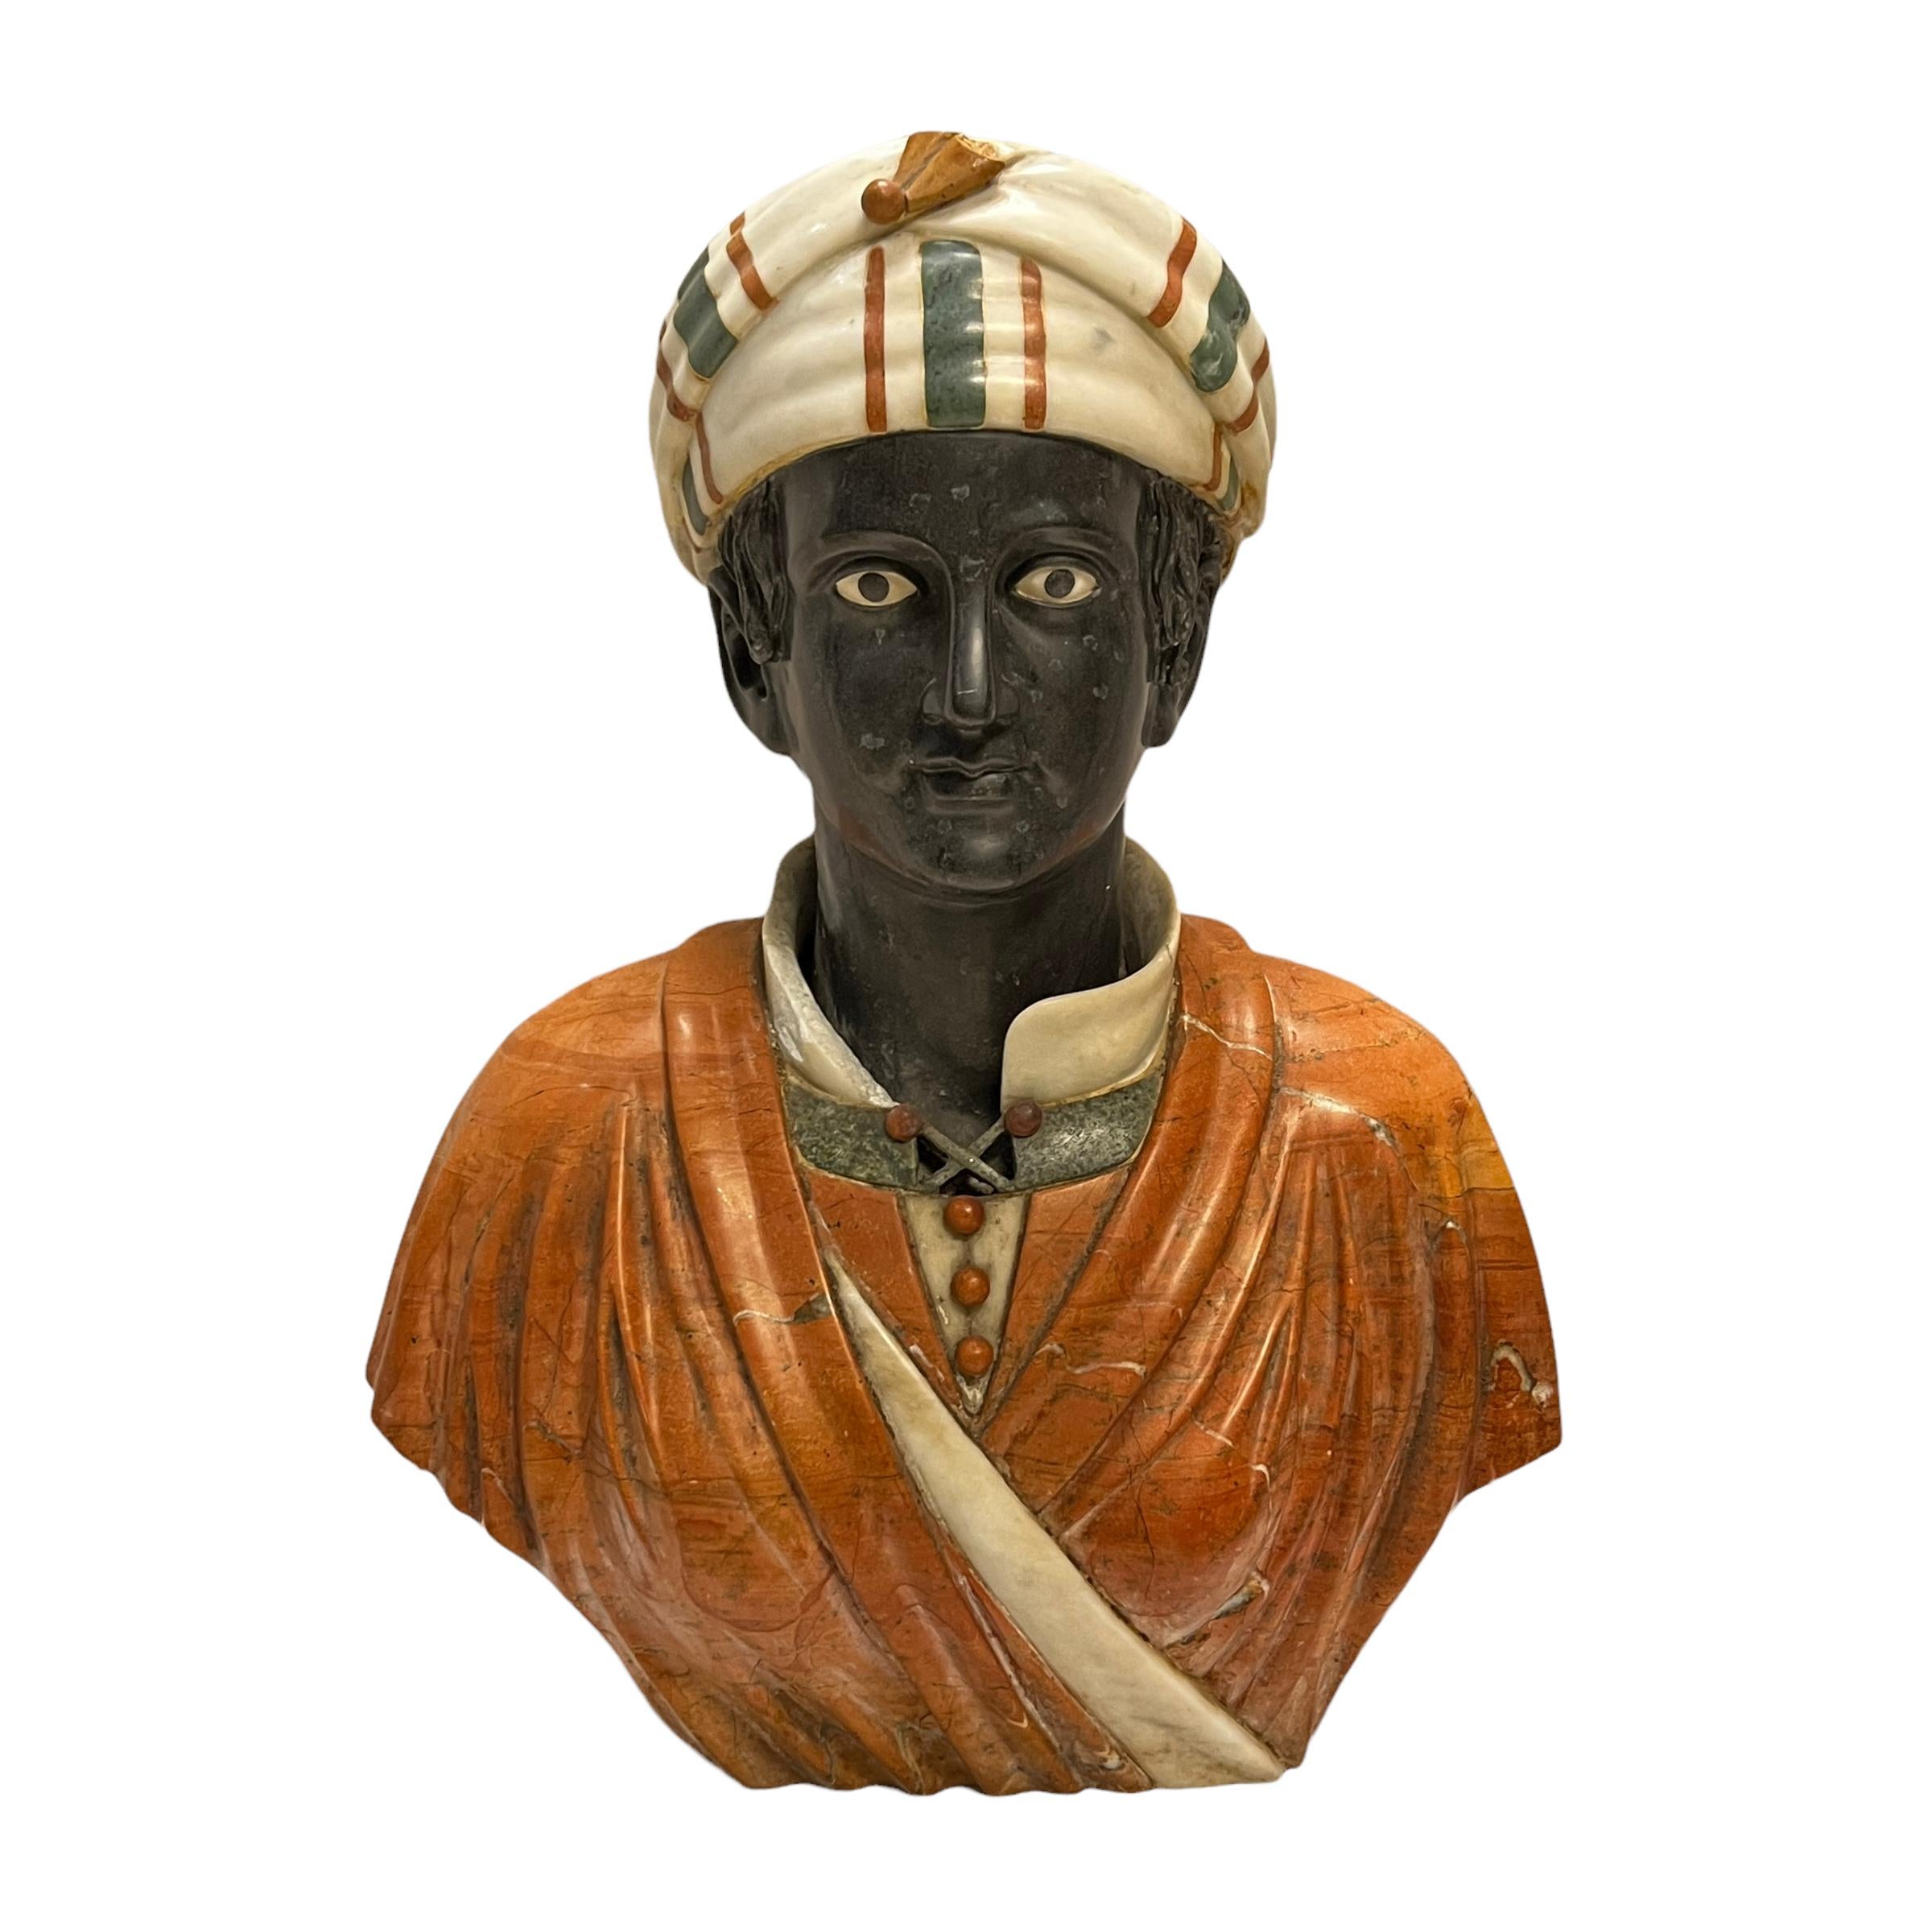 Nubian specimen marble bust dating. Apparently unsigned. In good condition, with scratches and some small chip losses including loss to the feather on the front of the turban.